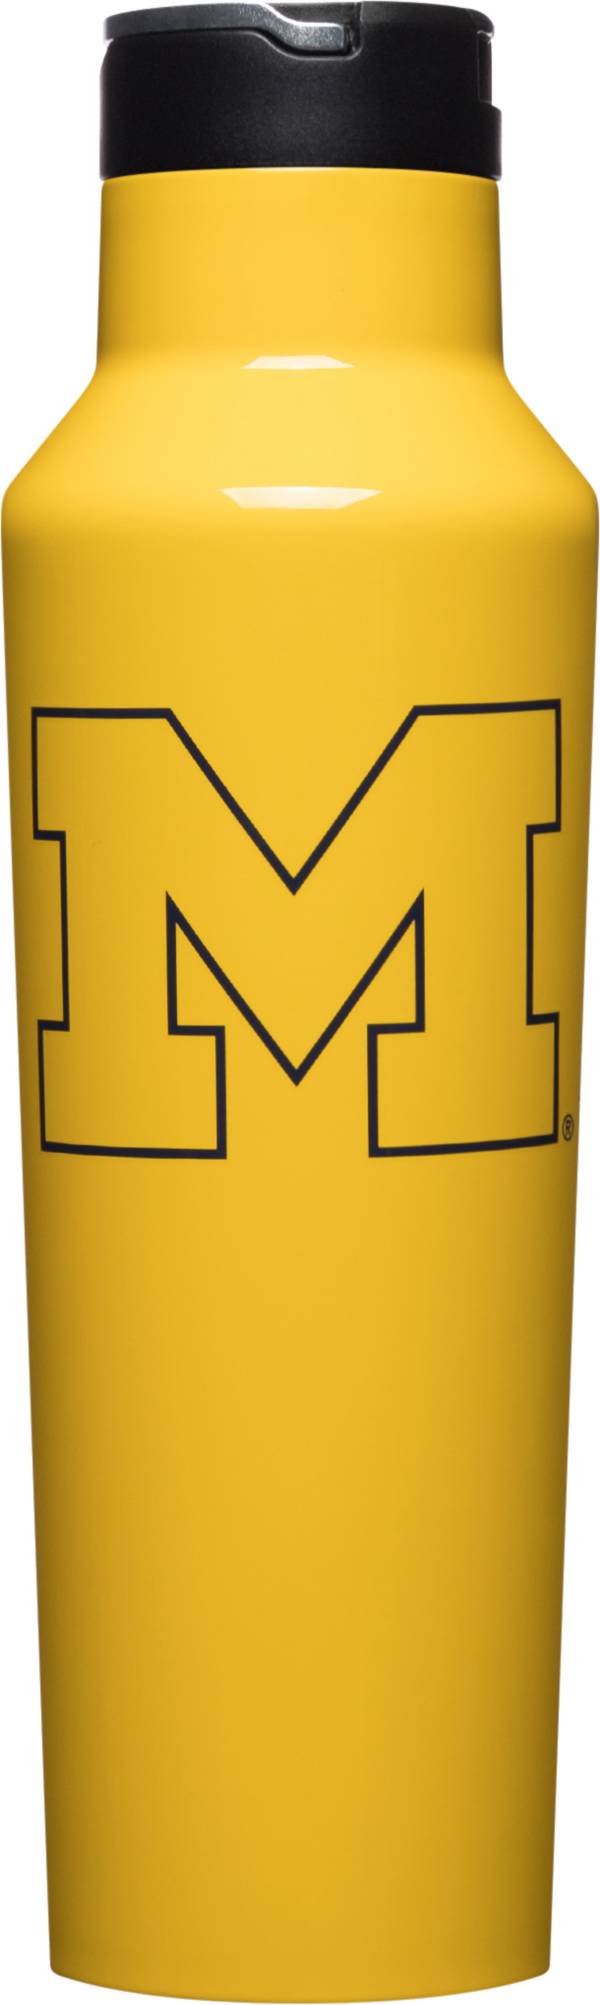 Corkcicle Michigan Wolverines 20oz. Canteen product image